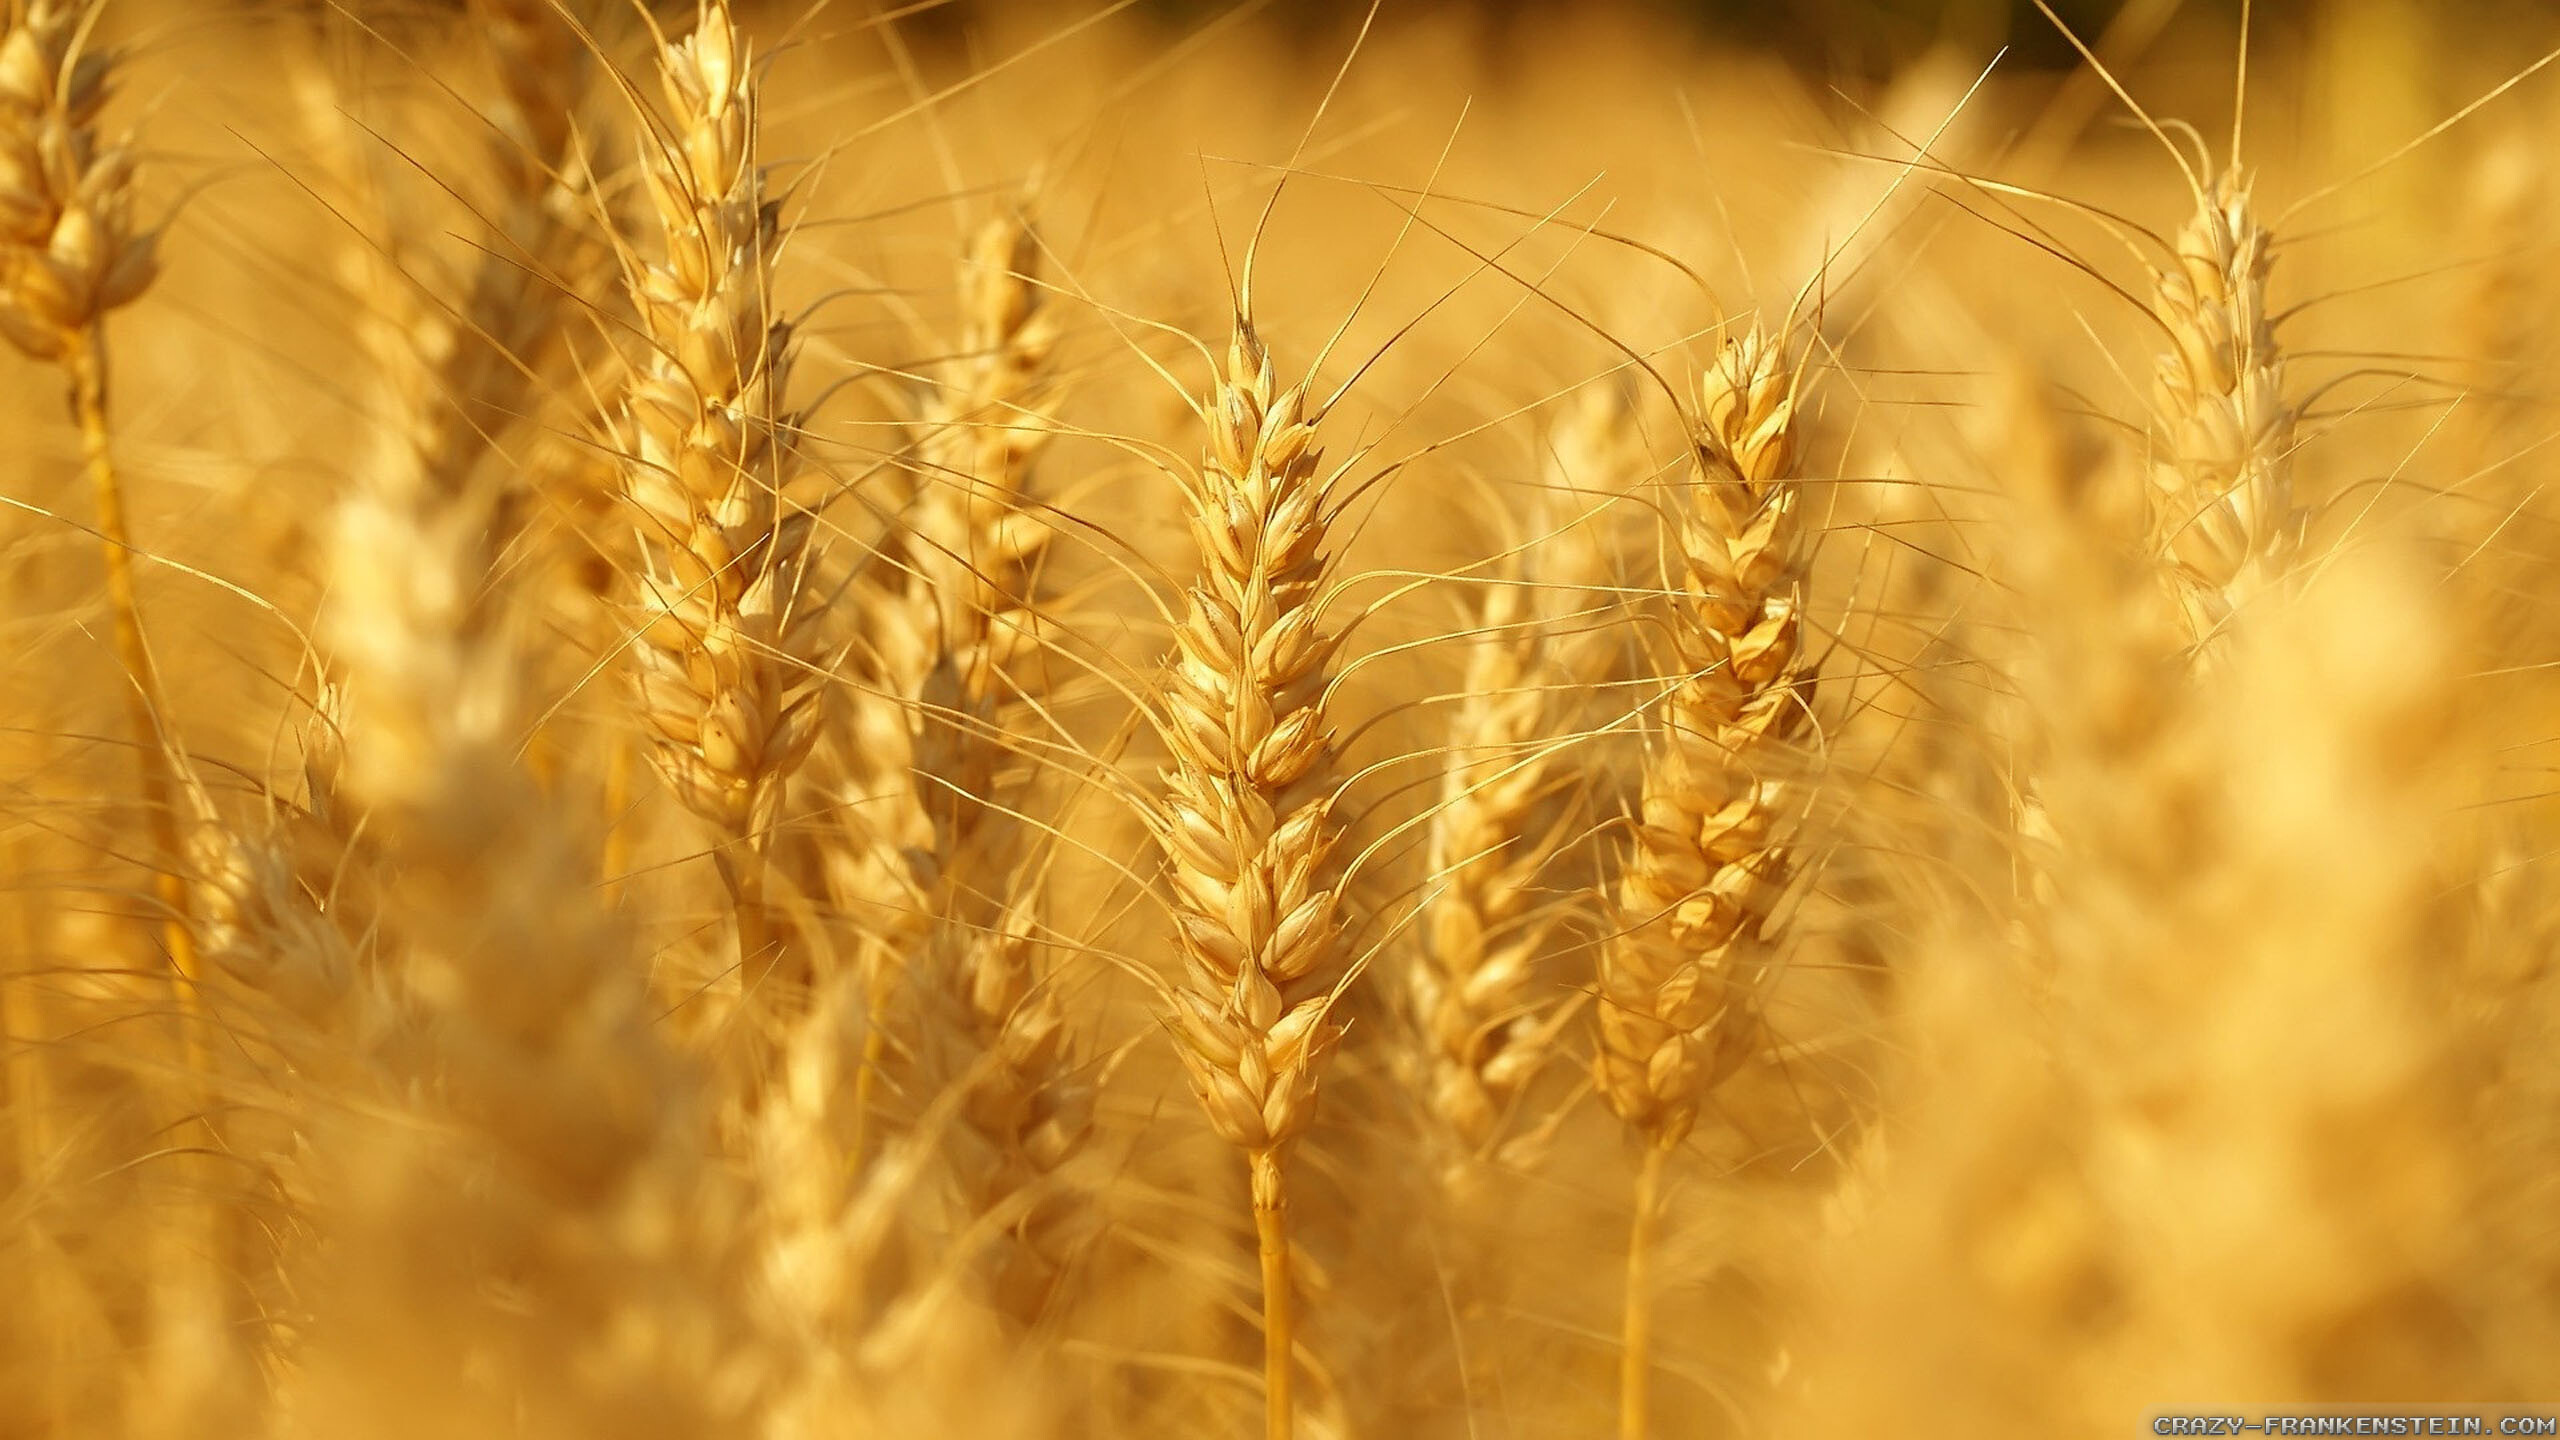 just-like-wheat-summer-nature-wallpapers-2560x1440